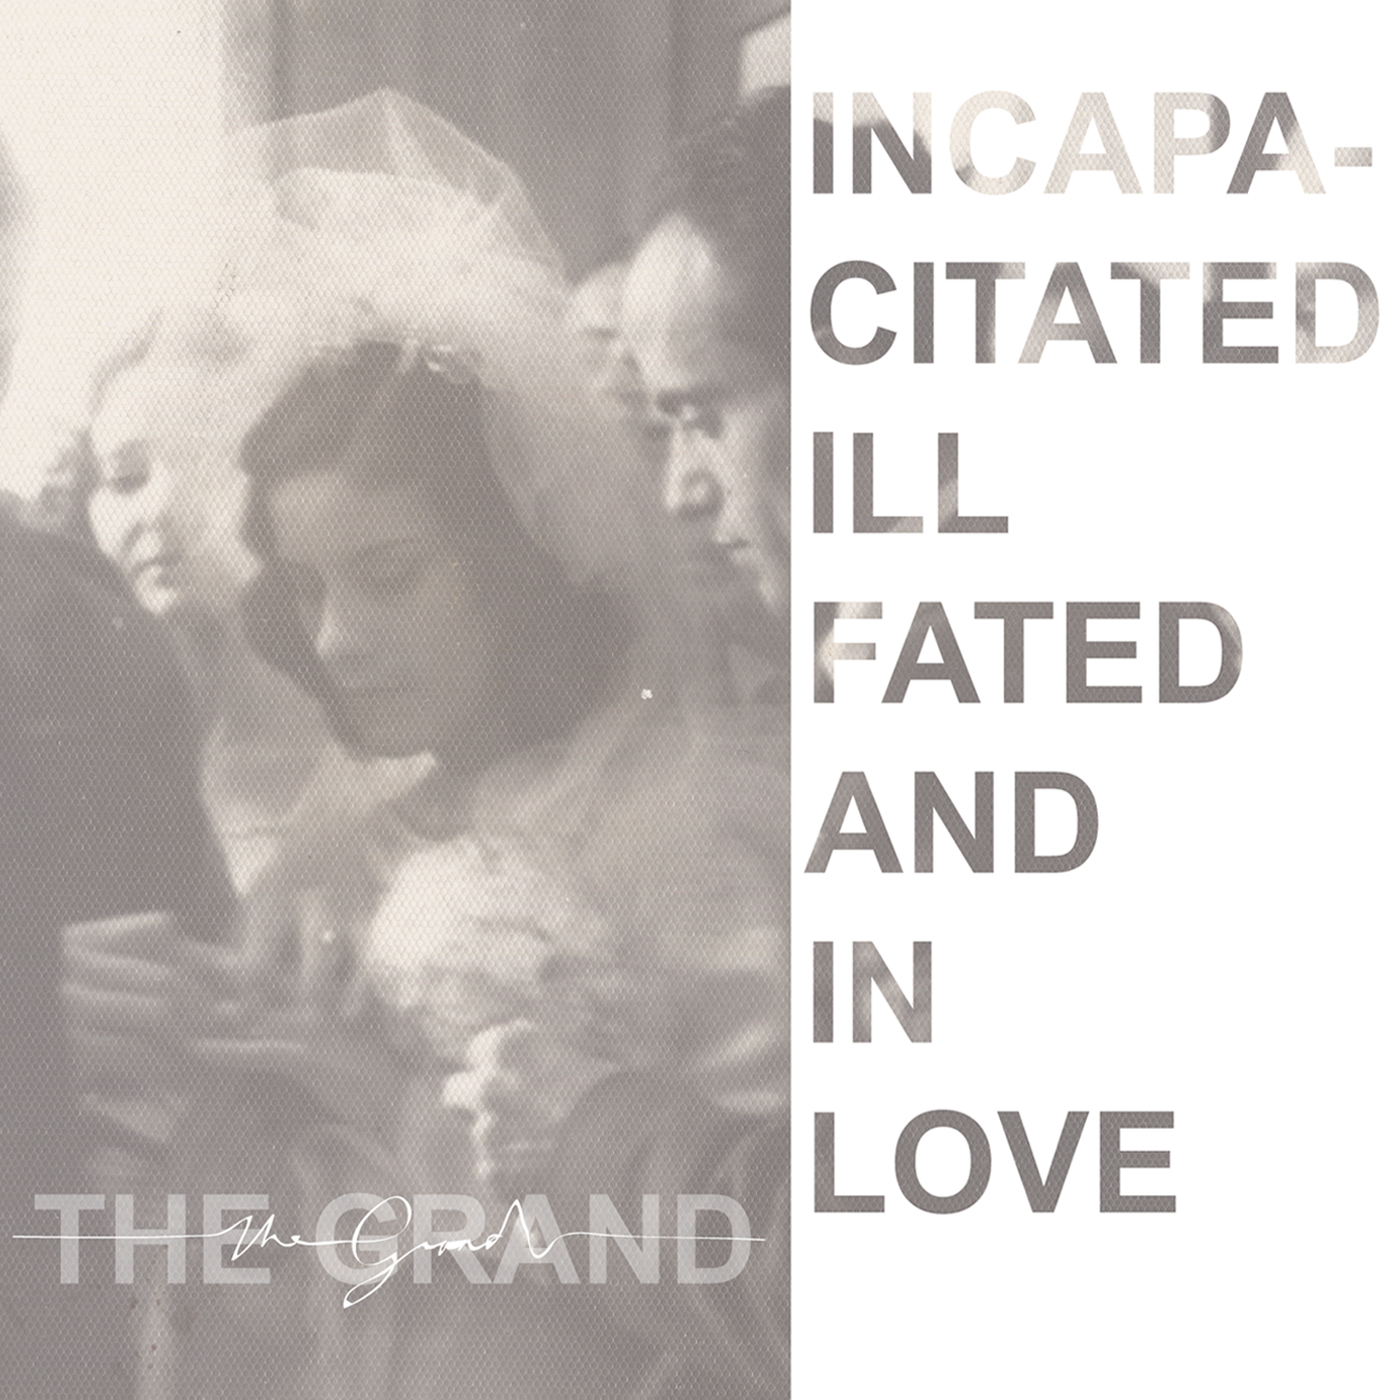 The Grand - Incapacitated, Ill Fated, and In Love (Philophobia Music) 1